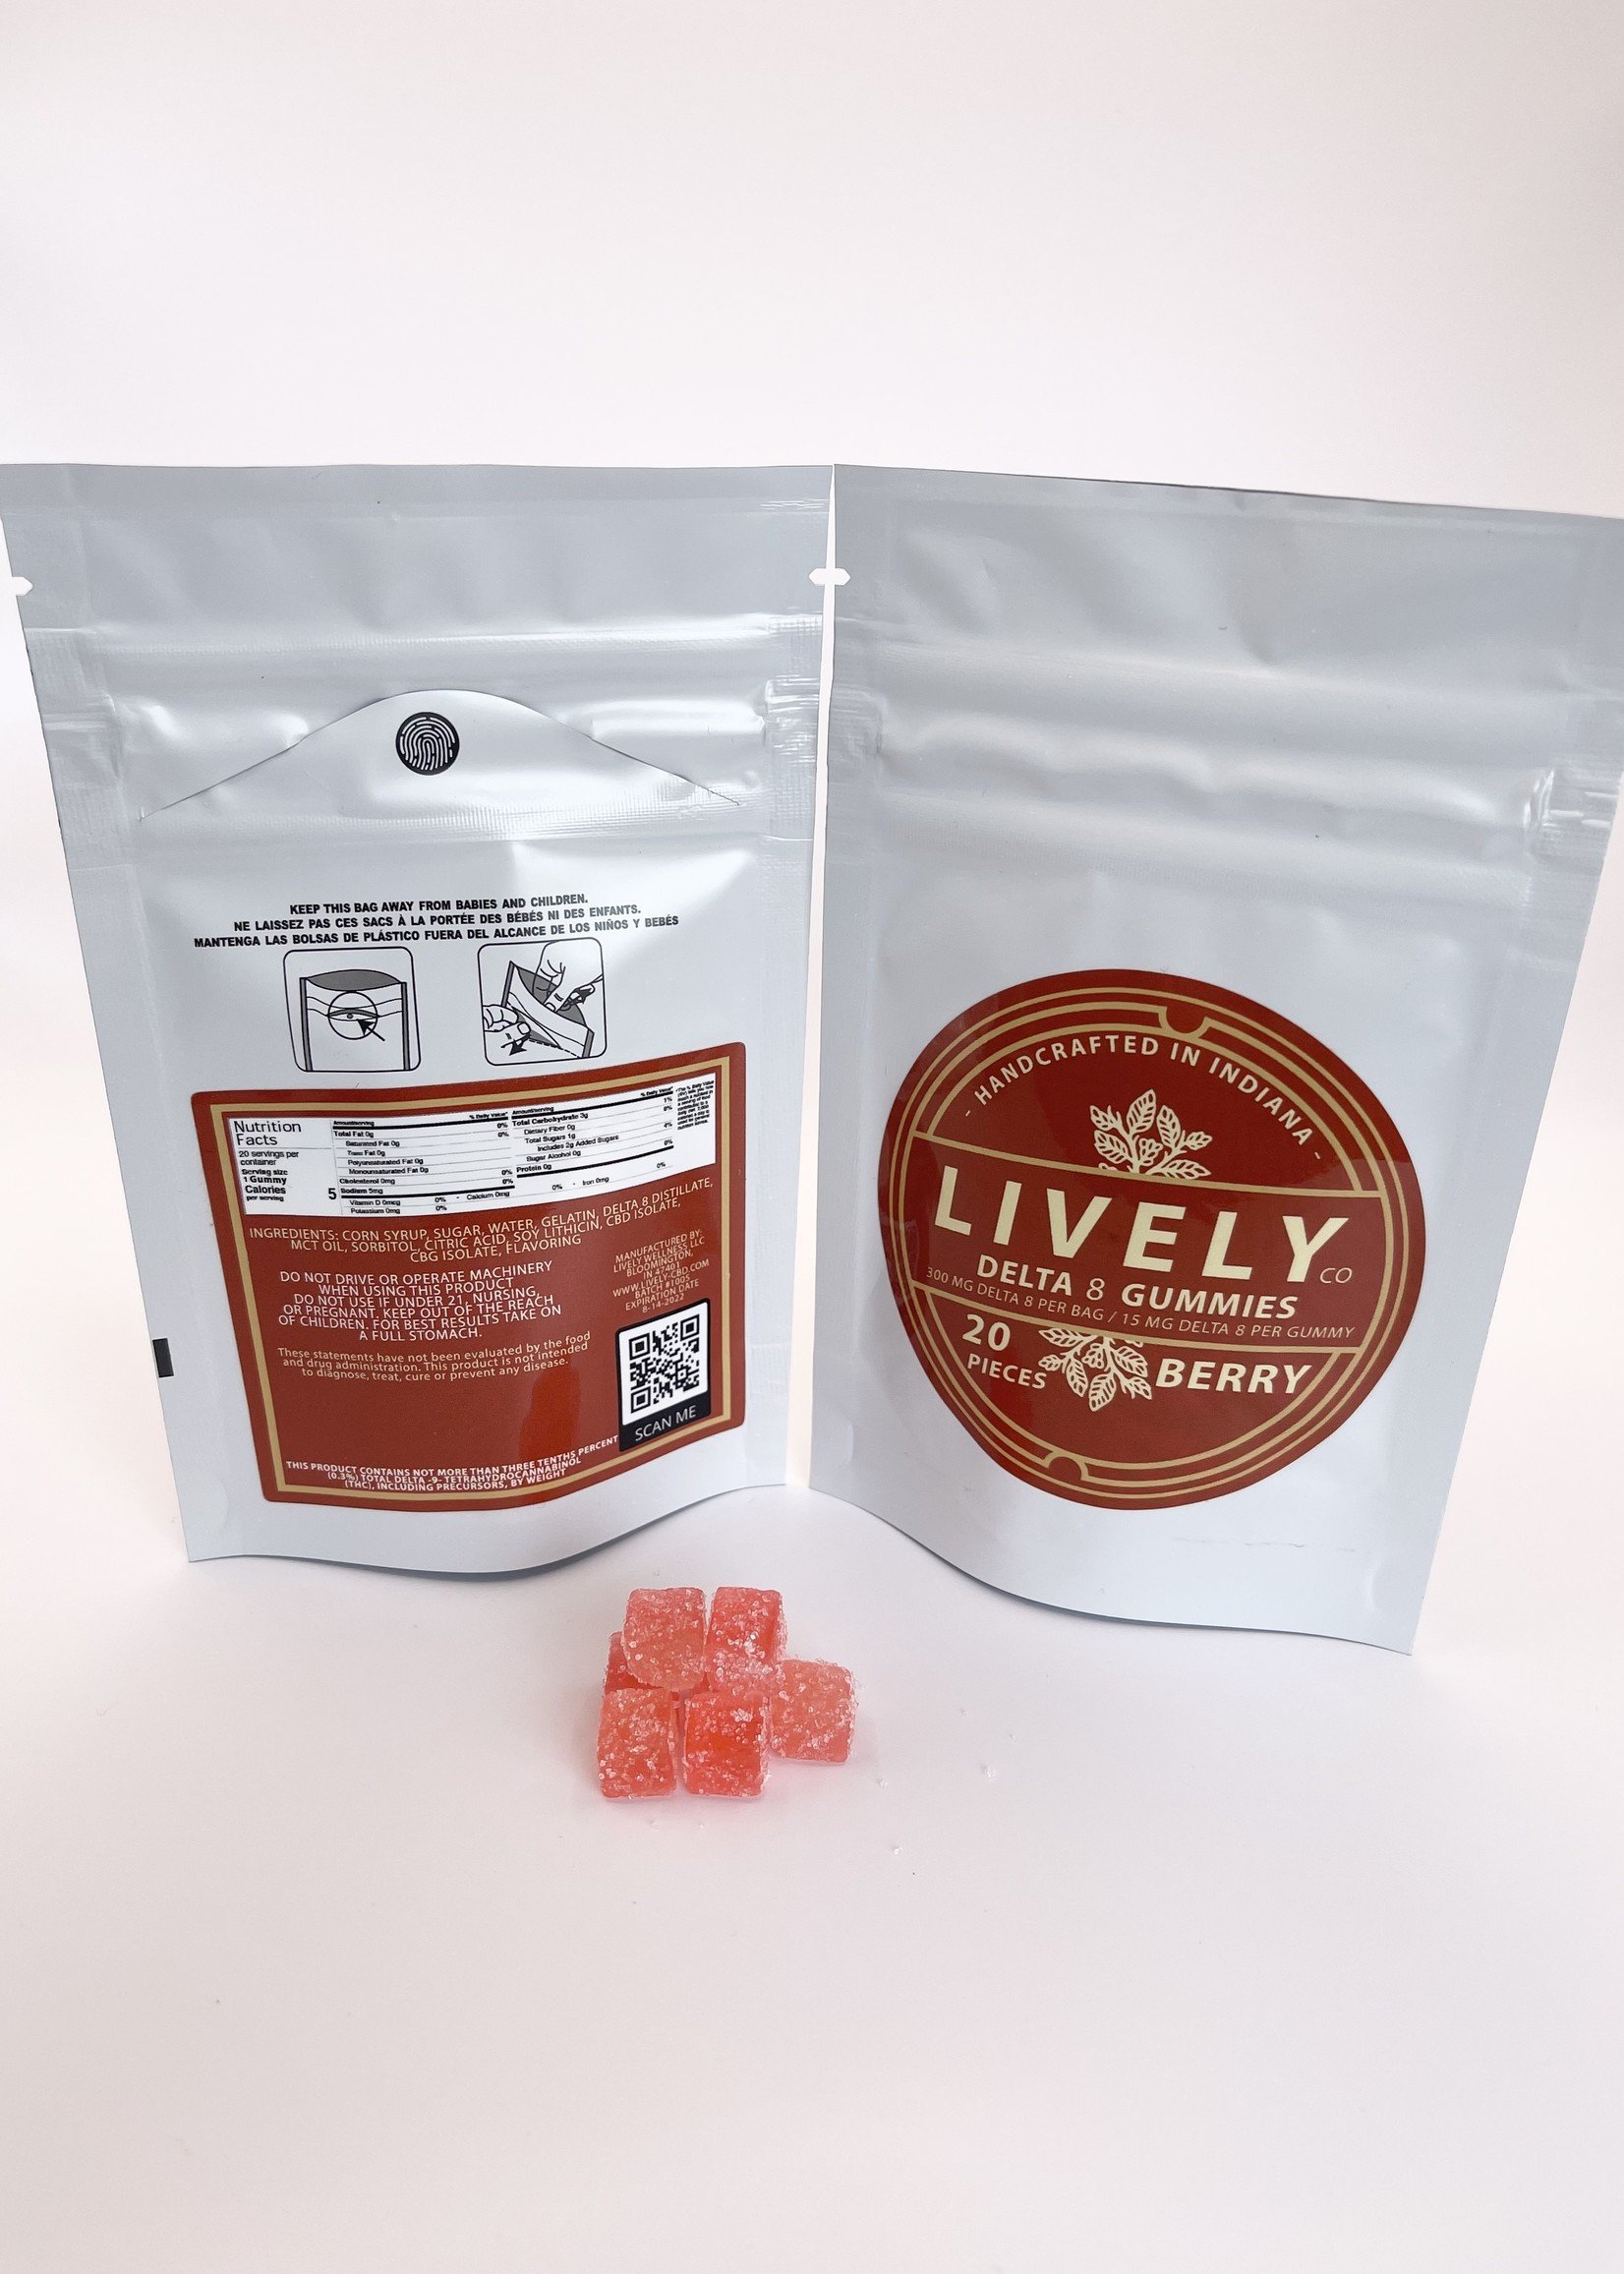 Lively co Lively delta 8 gummies